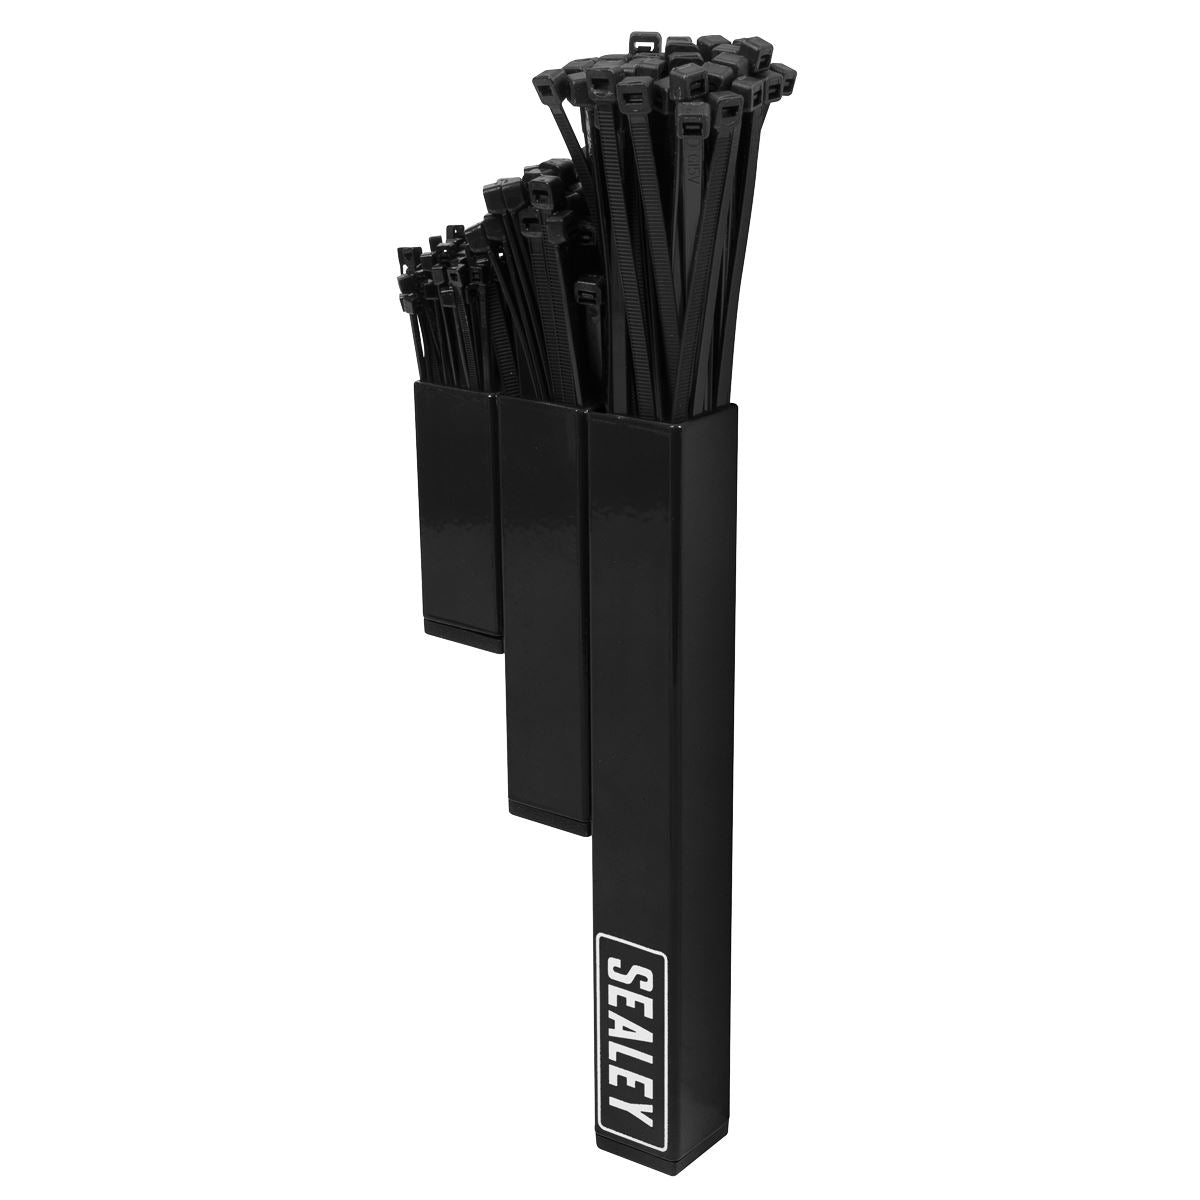 Sealey Magnetic Cable Tie Holder - Black